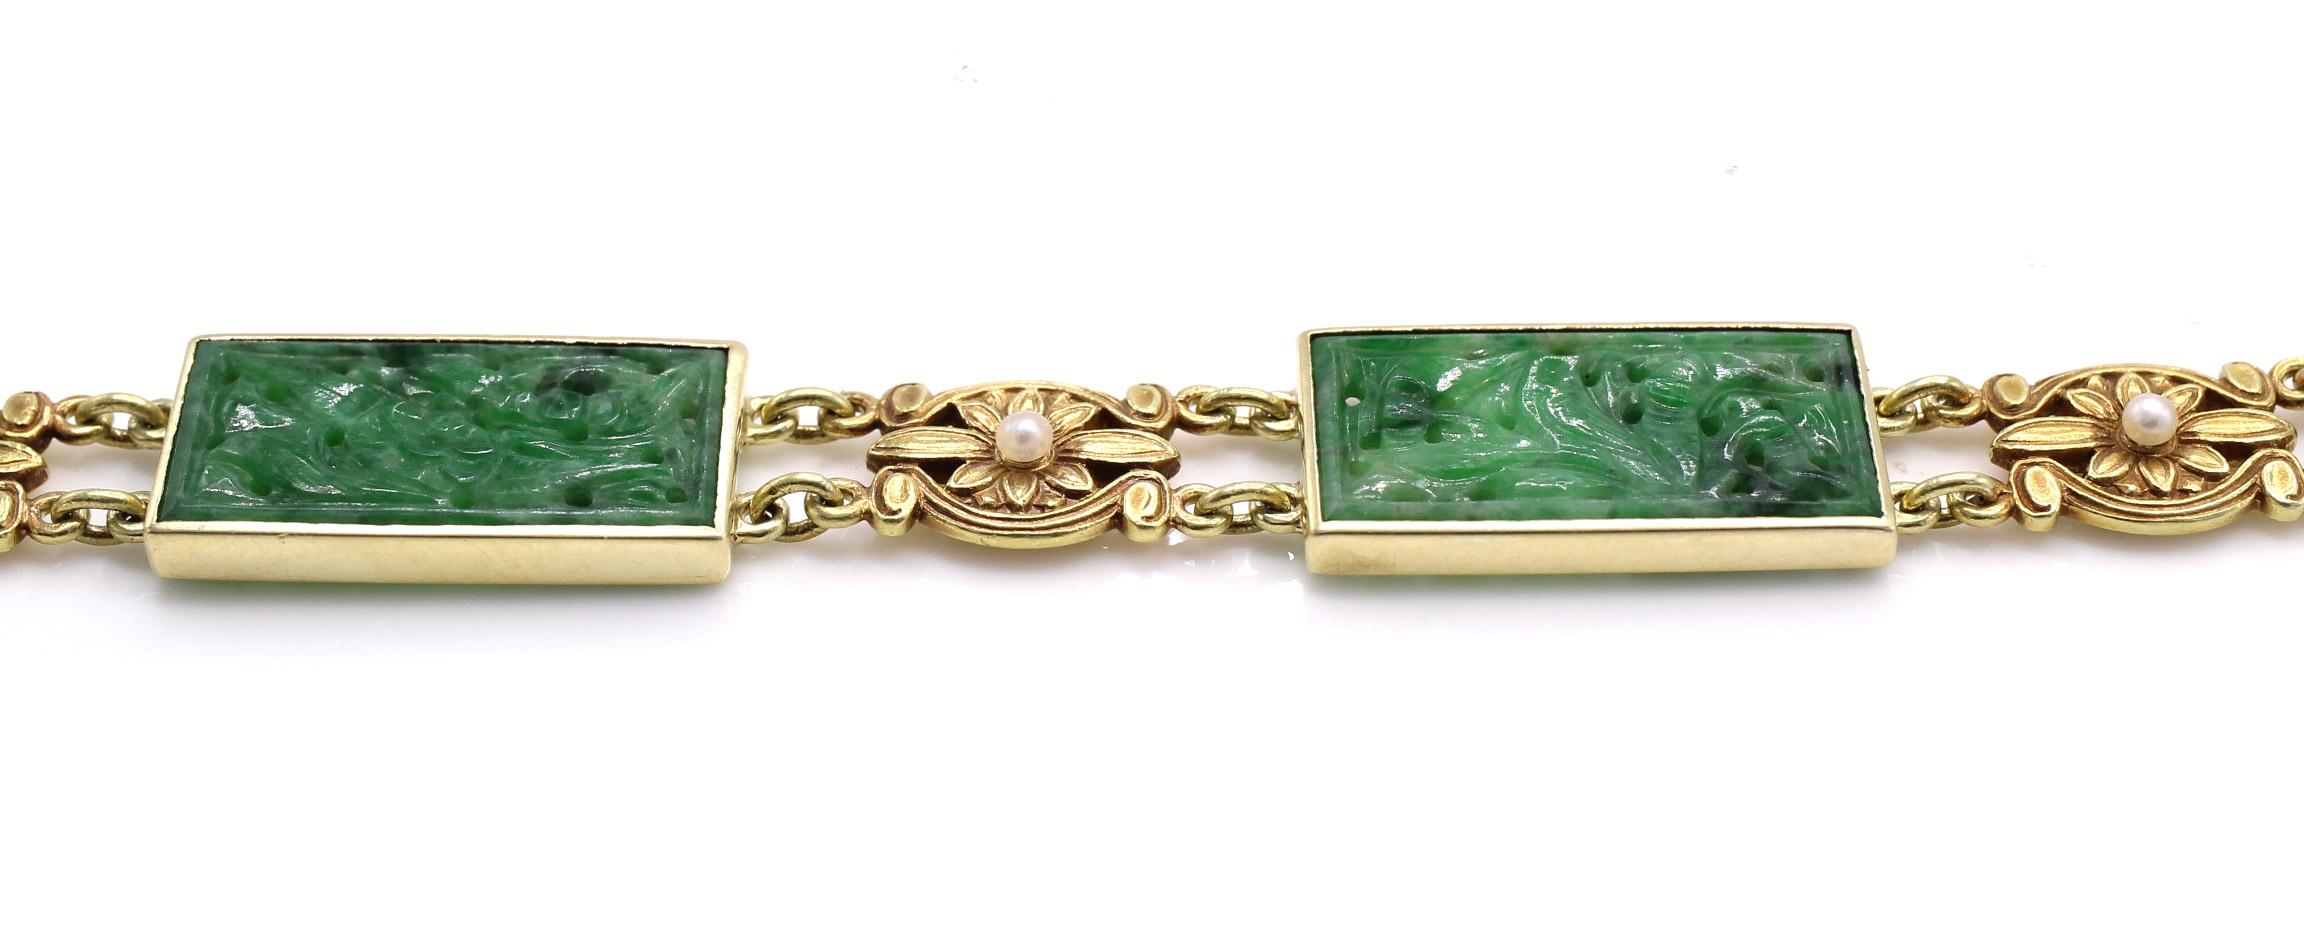 Beautifully designed and masterfully handcrafted by the renown American jeweler Tiffany & Co this bracelet is a true piece of art and history on the wrist. 3 wonderfully carved rectangular pieces of jadeite jade are bezel set in a frames of 18 karat